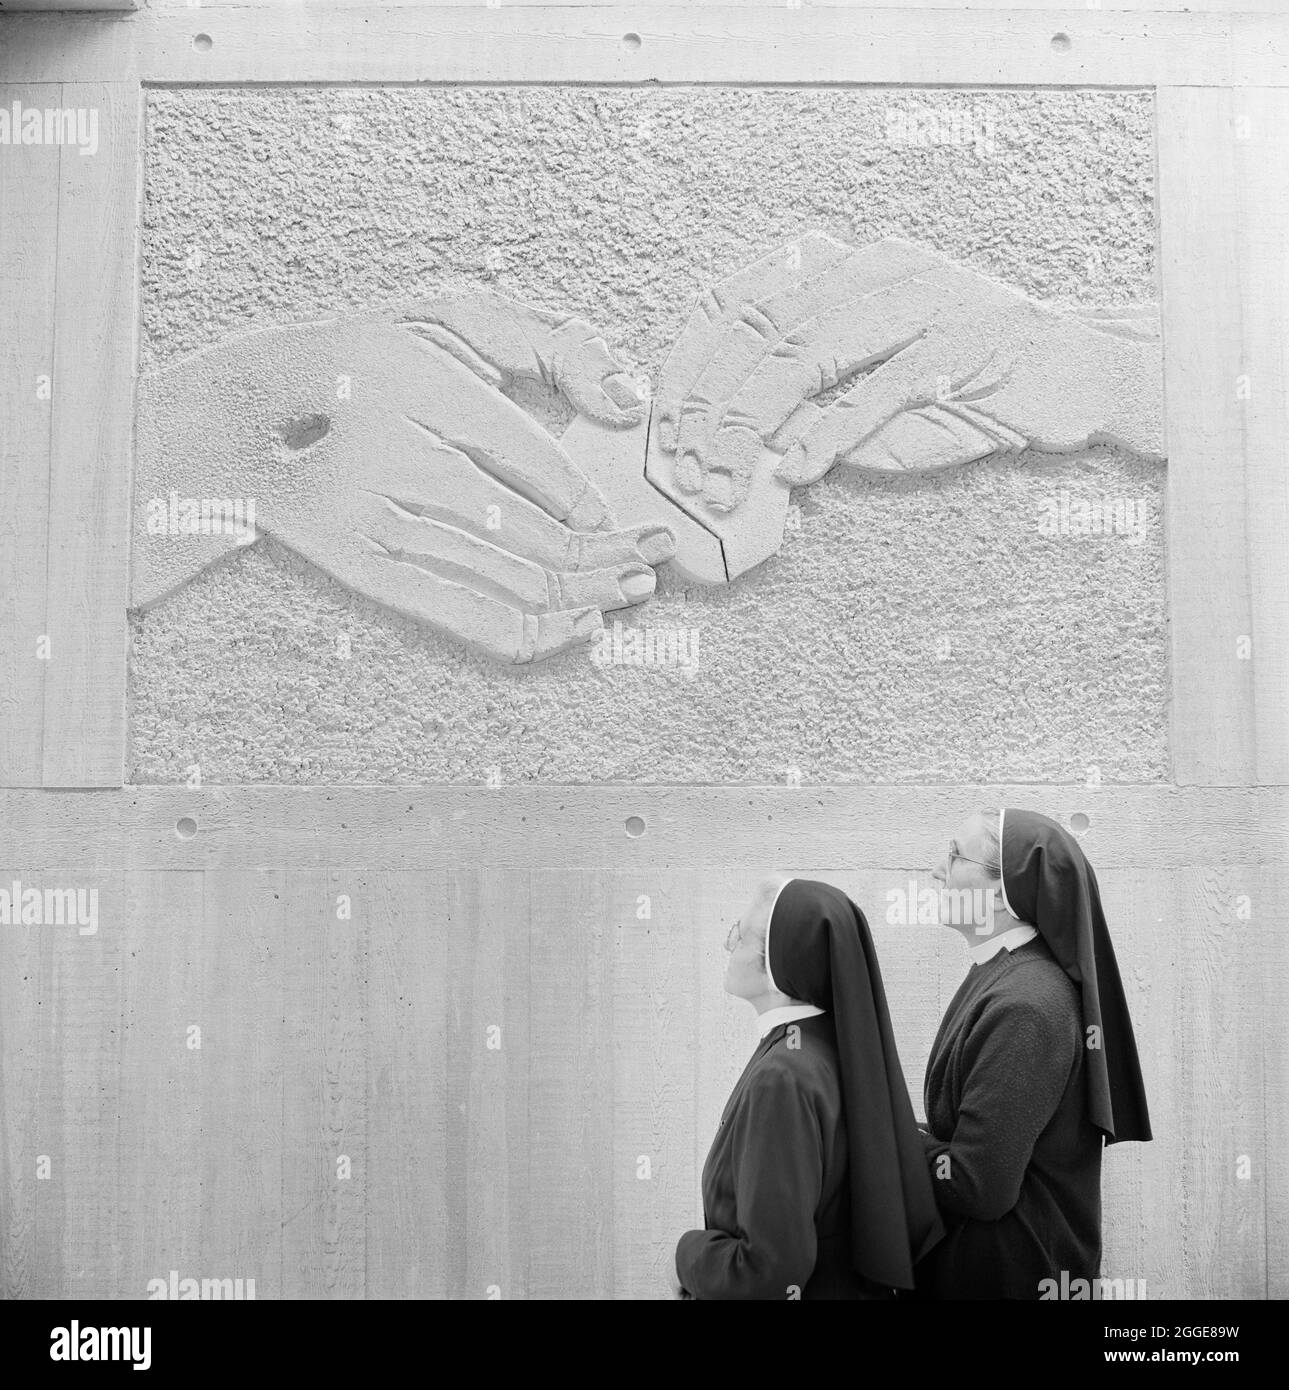 Two nuns looking up at a panel created in Faircrete by sculptor William Mitchell in Clifton Cathedral, depicting one of the Stations of the Cross. This Roman Catholic Cathedral was designed by Ronald Weeks, E S Jennett and Antoni Poremba of the Percy Thomas Partnership. It was built by John Laing &amp; Son Limited between 1969-1973 and was constructed using pre-cast concrete panels and in-situ concrete. In 1974 it received the Concrete Award from the Concrete Society. The English sculptor William Mitchell (born 1925) was commissioned to create 14 panels showing the Stations of the Cross, depic Stock Photo